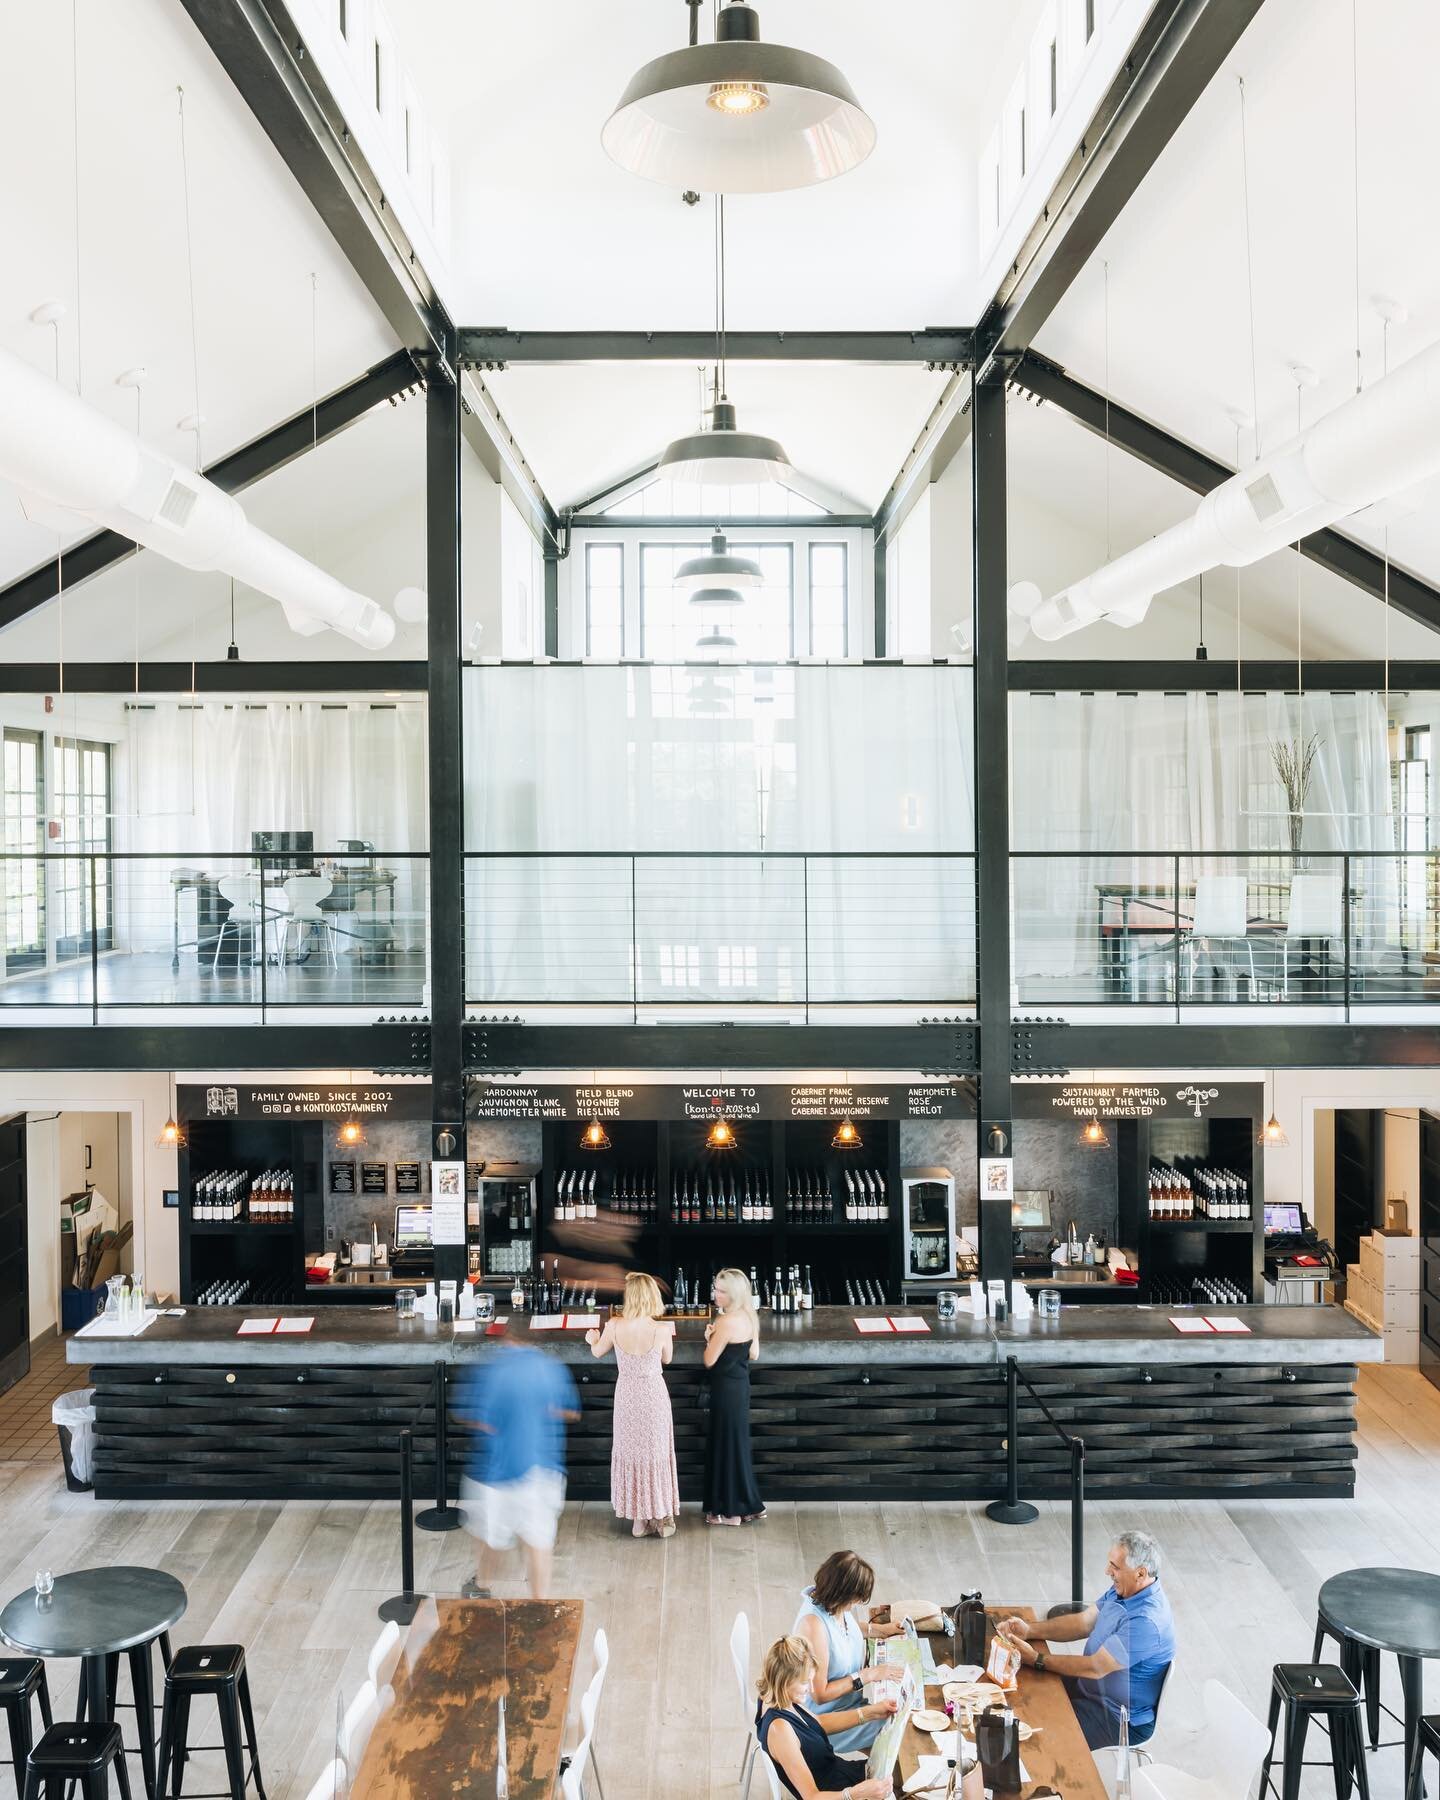 Kontokosta Winery on the North Fork of Long Island was designed with modernizing the idea of a traditional barn structure with blackened steel beams and contrasting white interior. 

@kontokostawinery 
📸 by @c.fenimore 

#northforkliving #interiorde